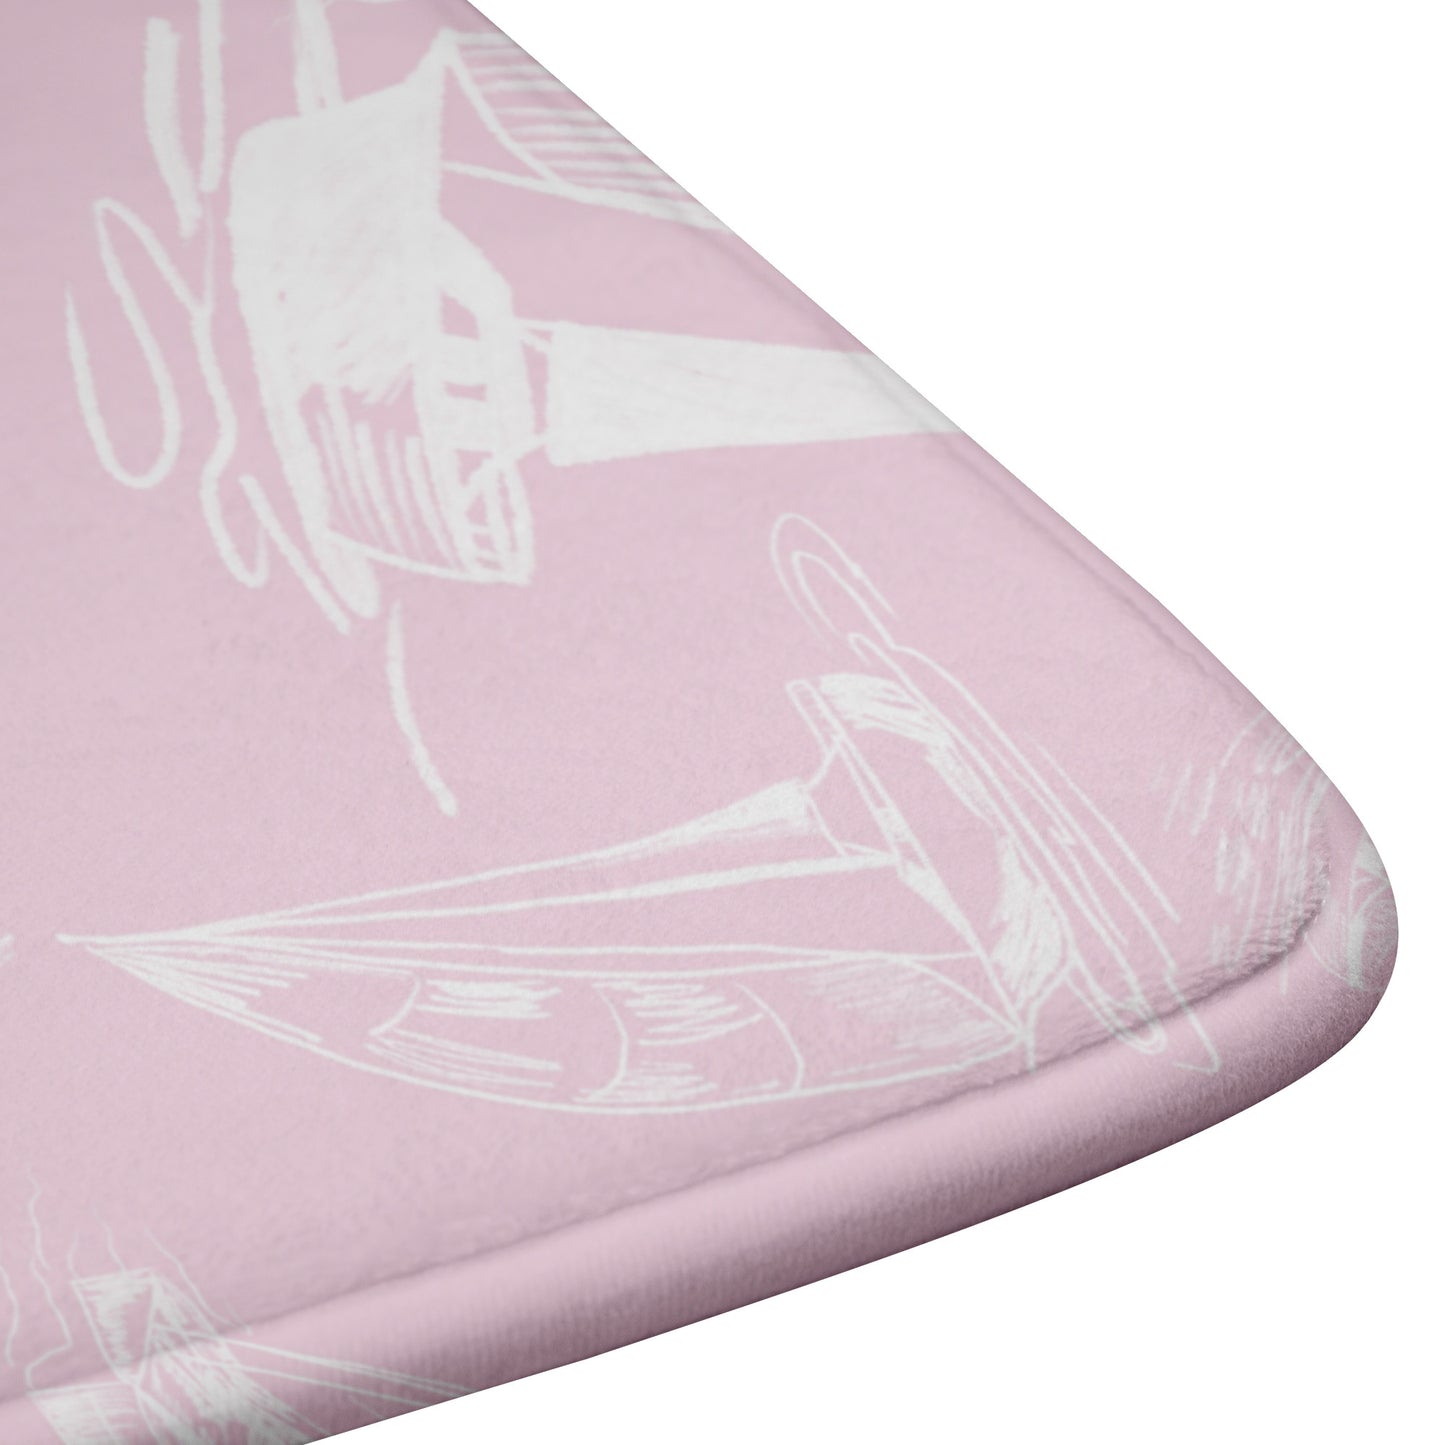 Sailboat Sketches on Pink Background, Bath Mats